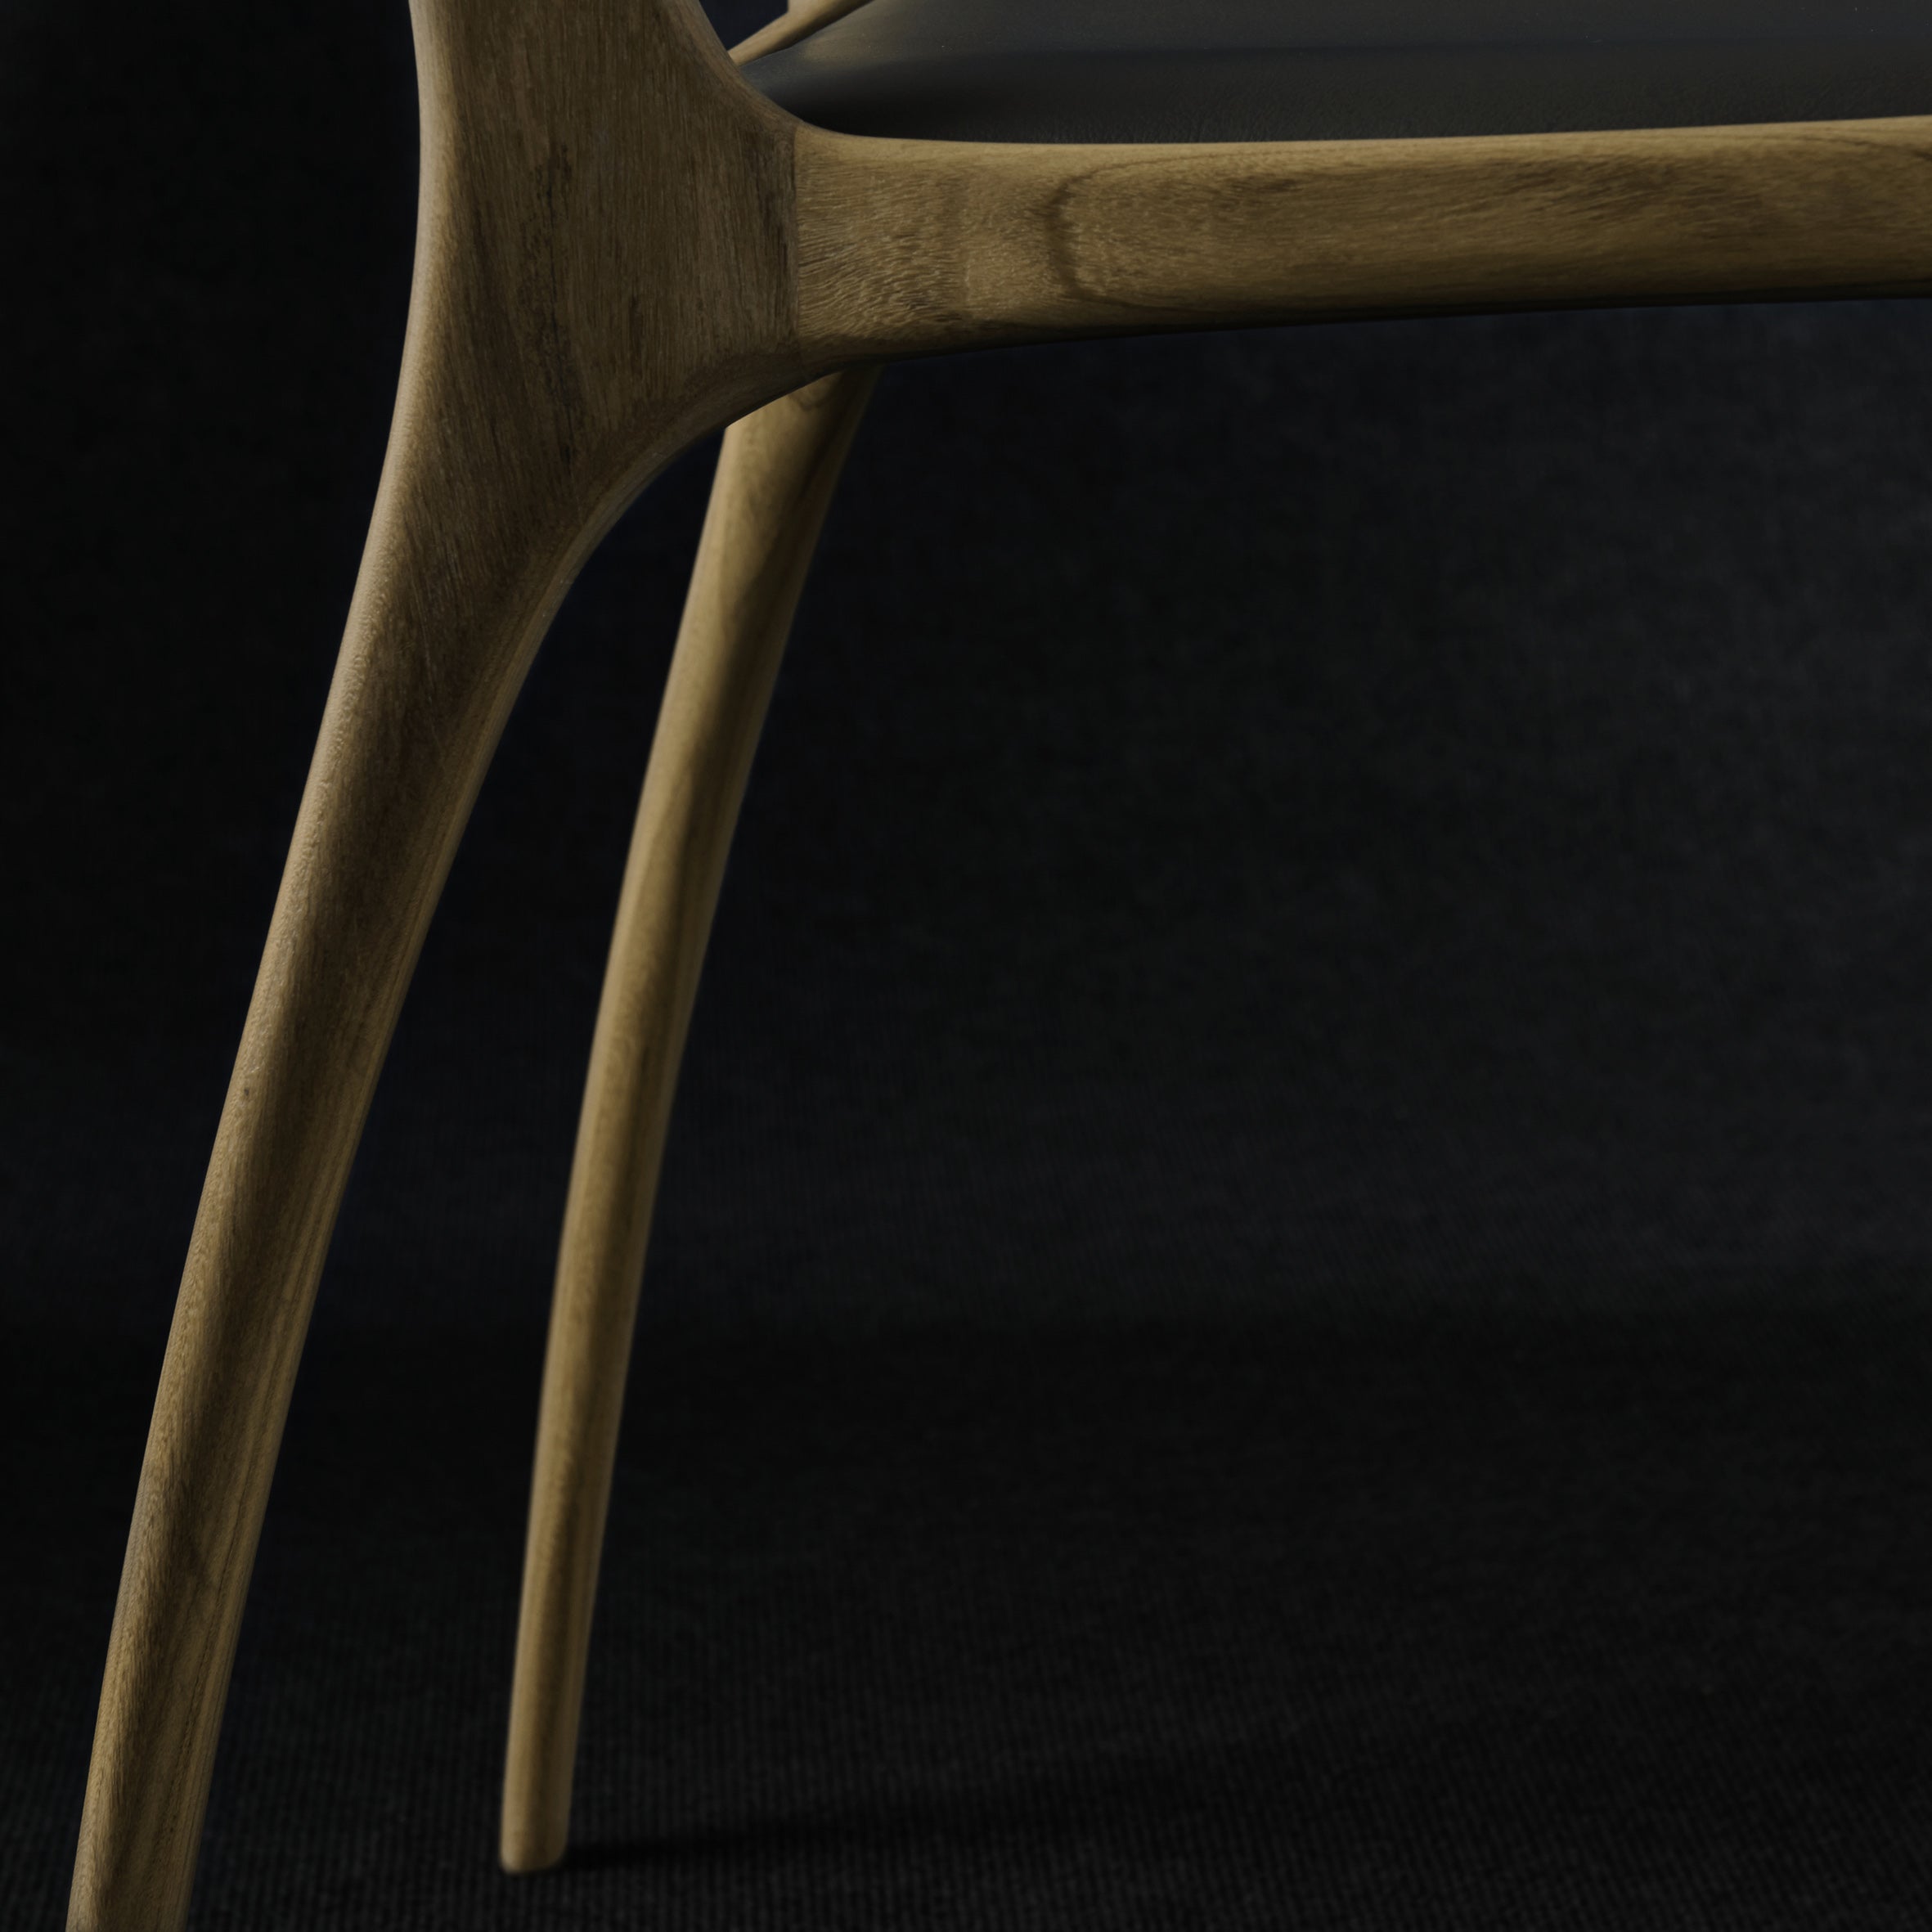 H106 SPIDER Chair afromosia leg detail side view